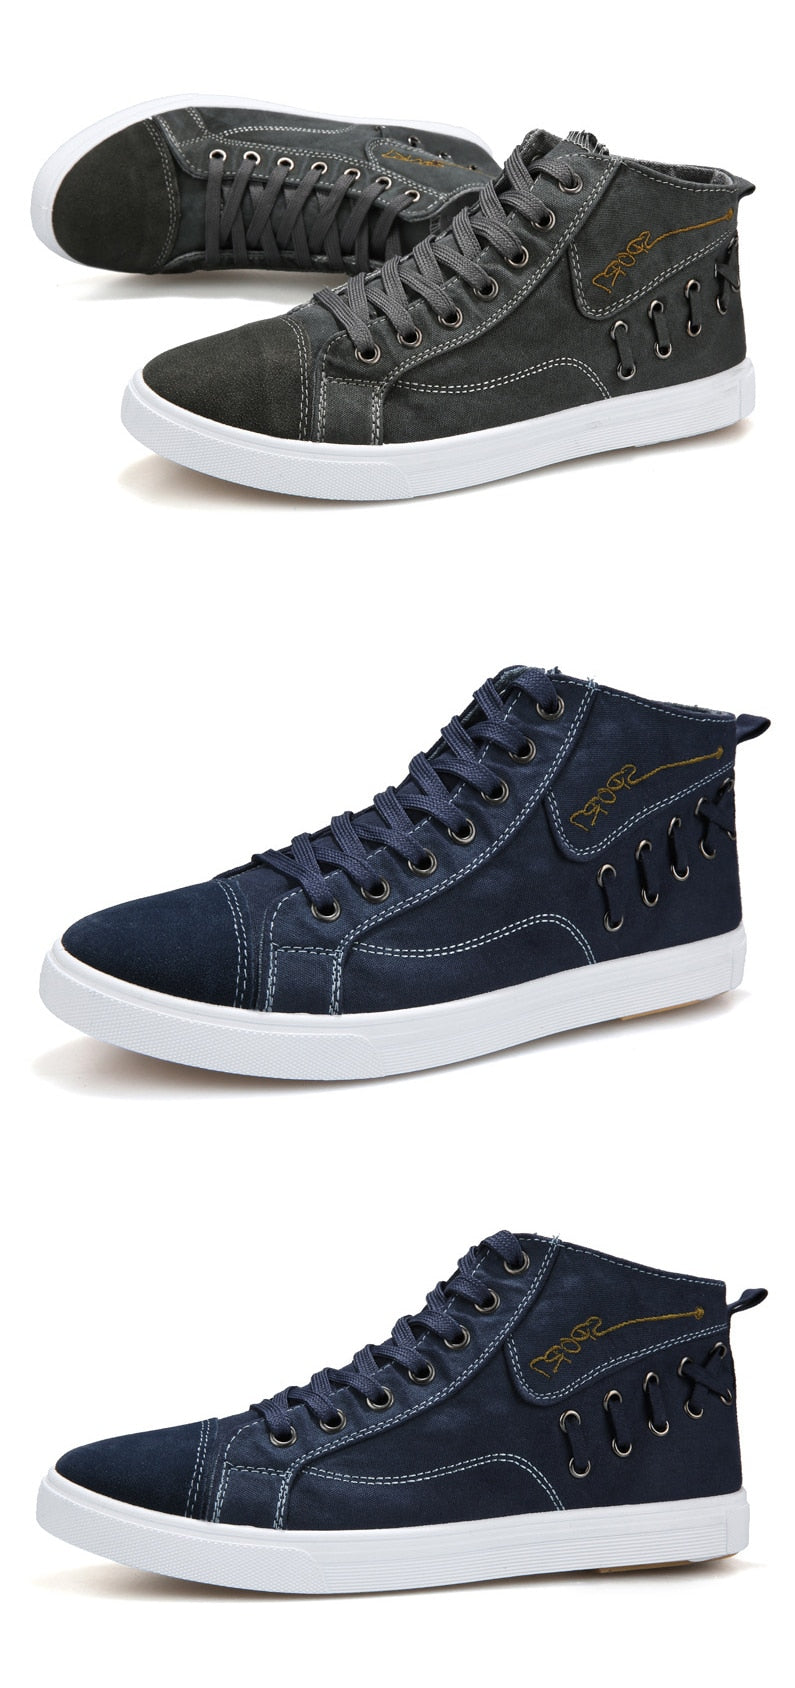 Autumn Sneakers Designer Cross Tied High Top Casual port Canvas Shoes Sneakers The Clothing Company Sydney